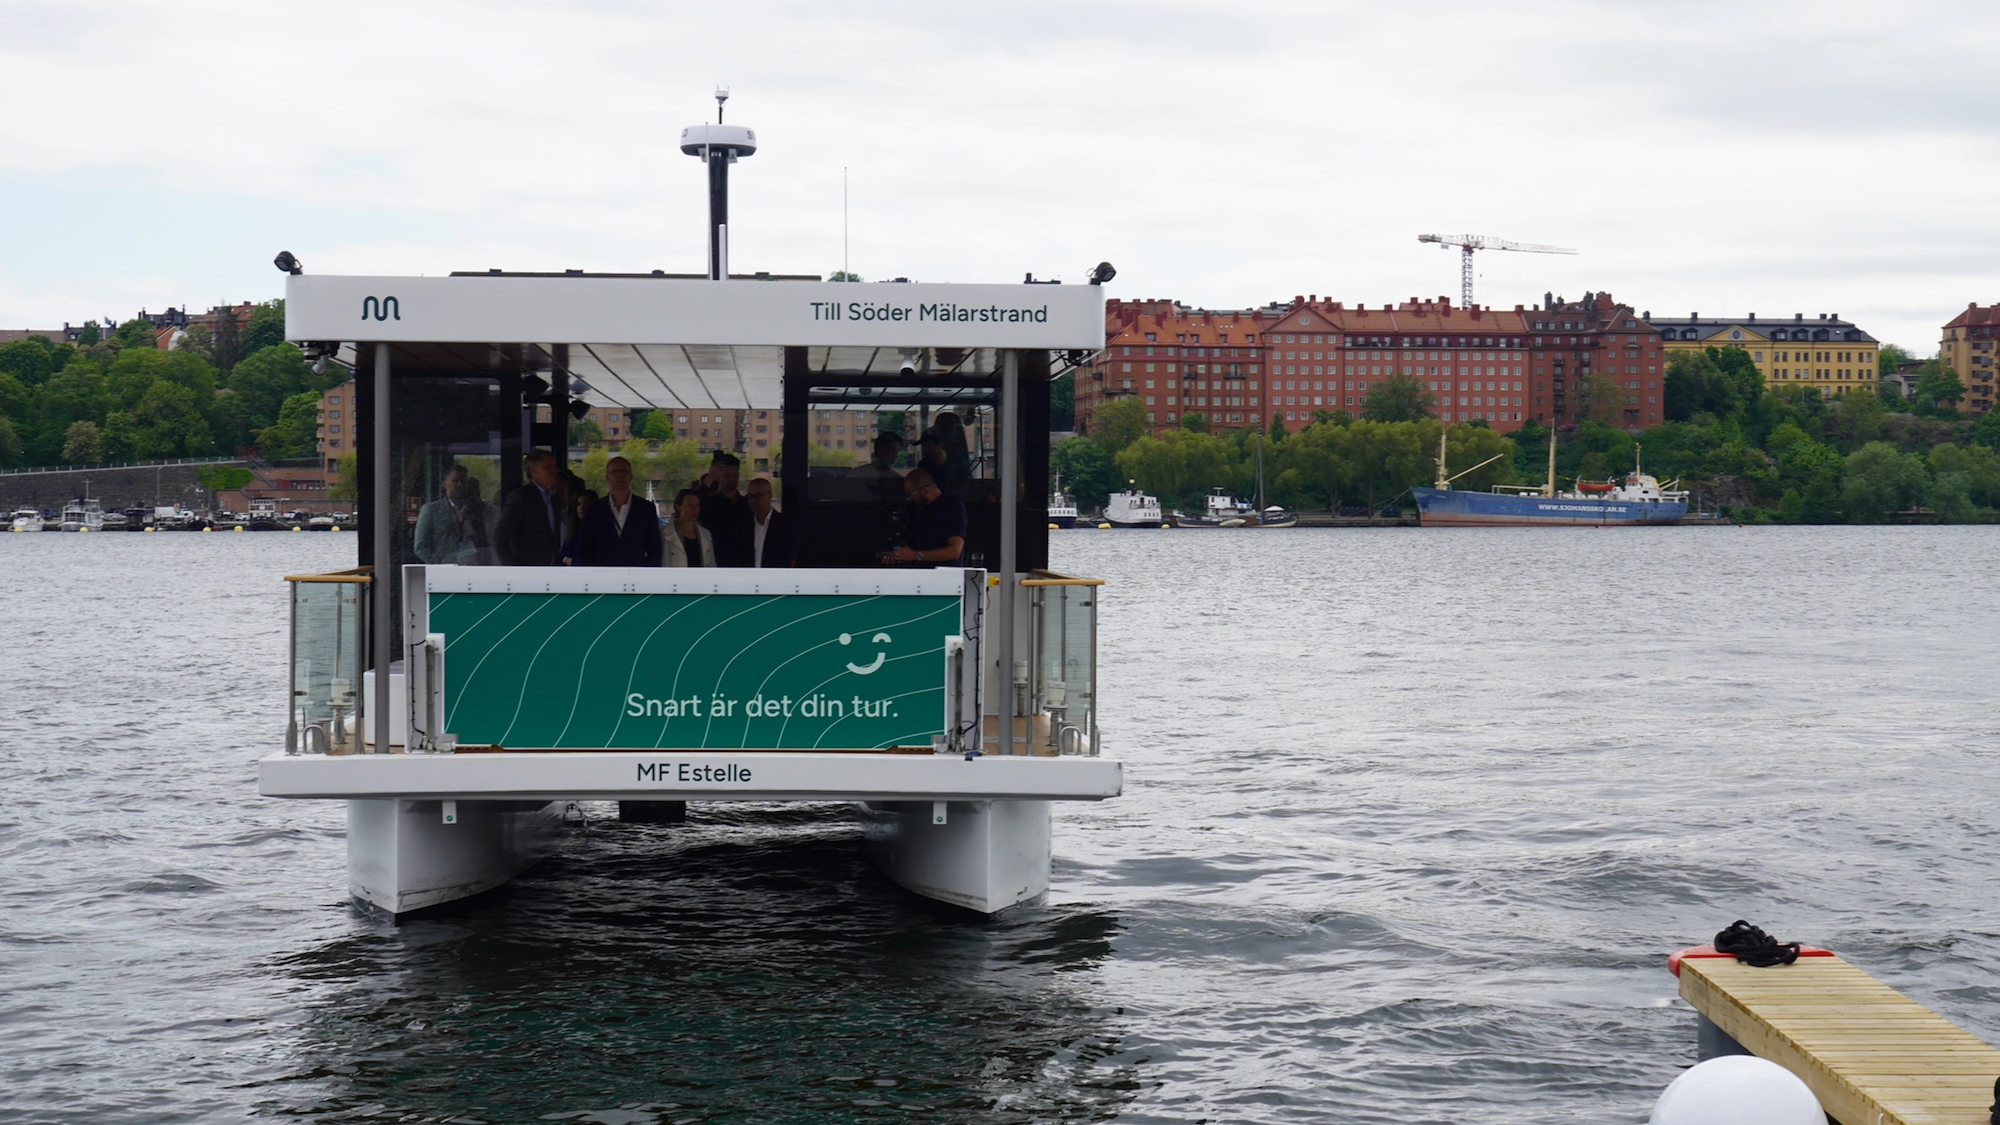 The world’s first self-driving ferry is now in service